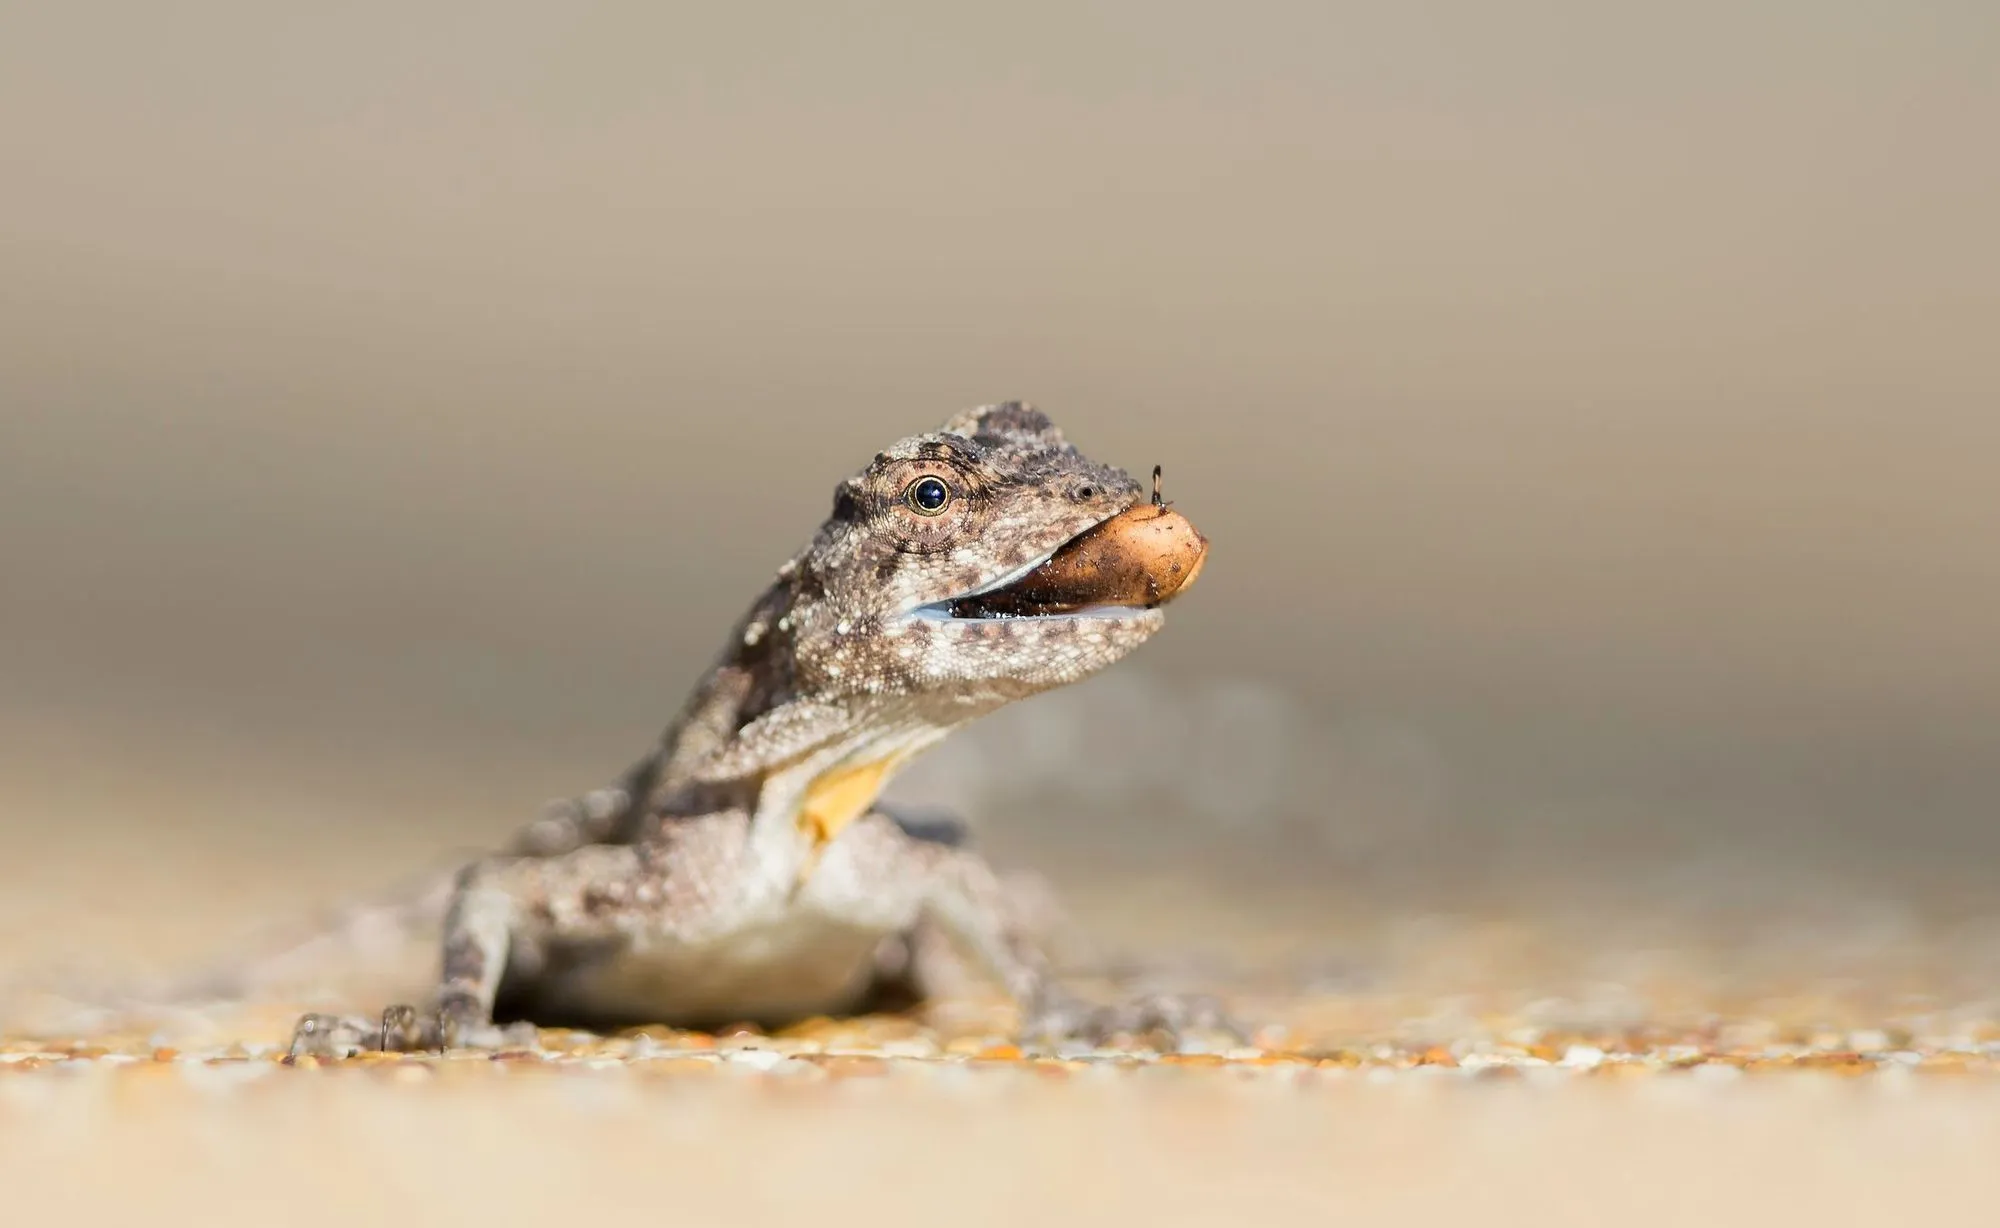 Interesting gliding lizard facts that are incredible.